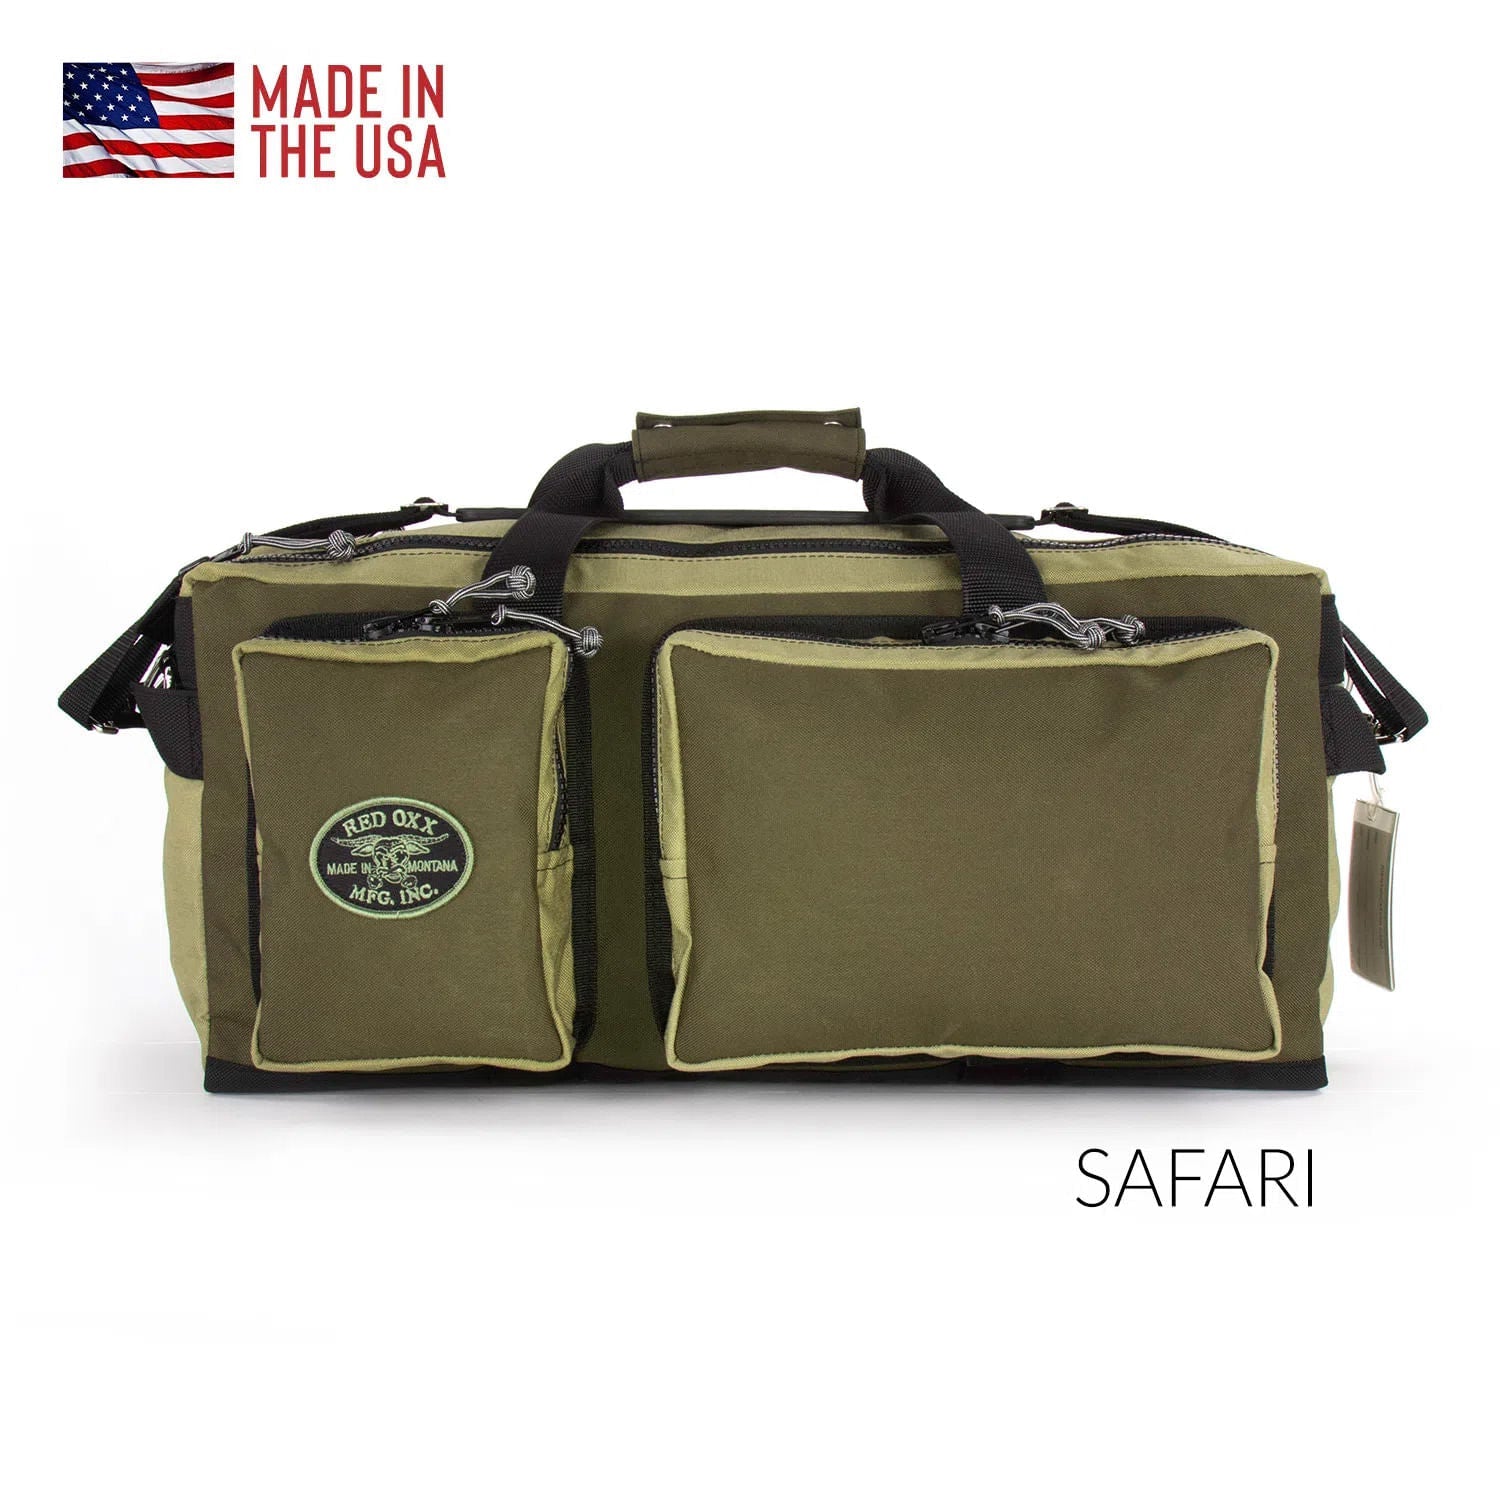 Safari - Carry-On Suitcase - 4 Wheels, Brown/Natural